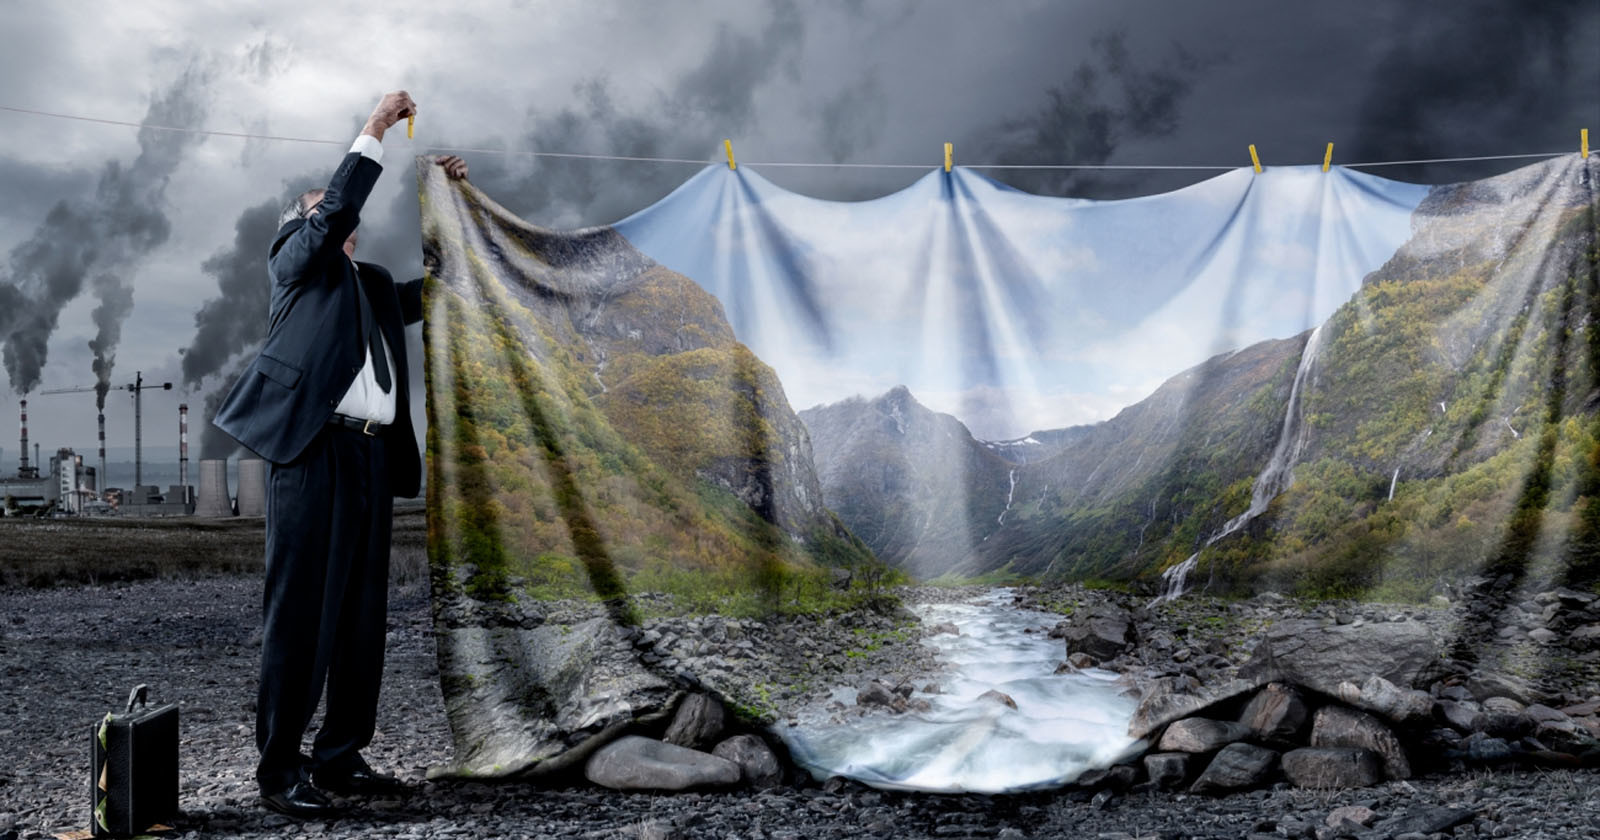  climate change-themed image wins 2022 creative photo 